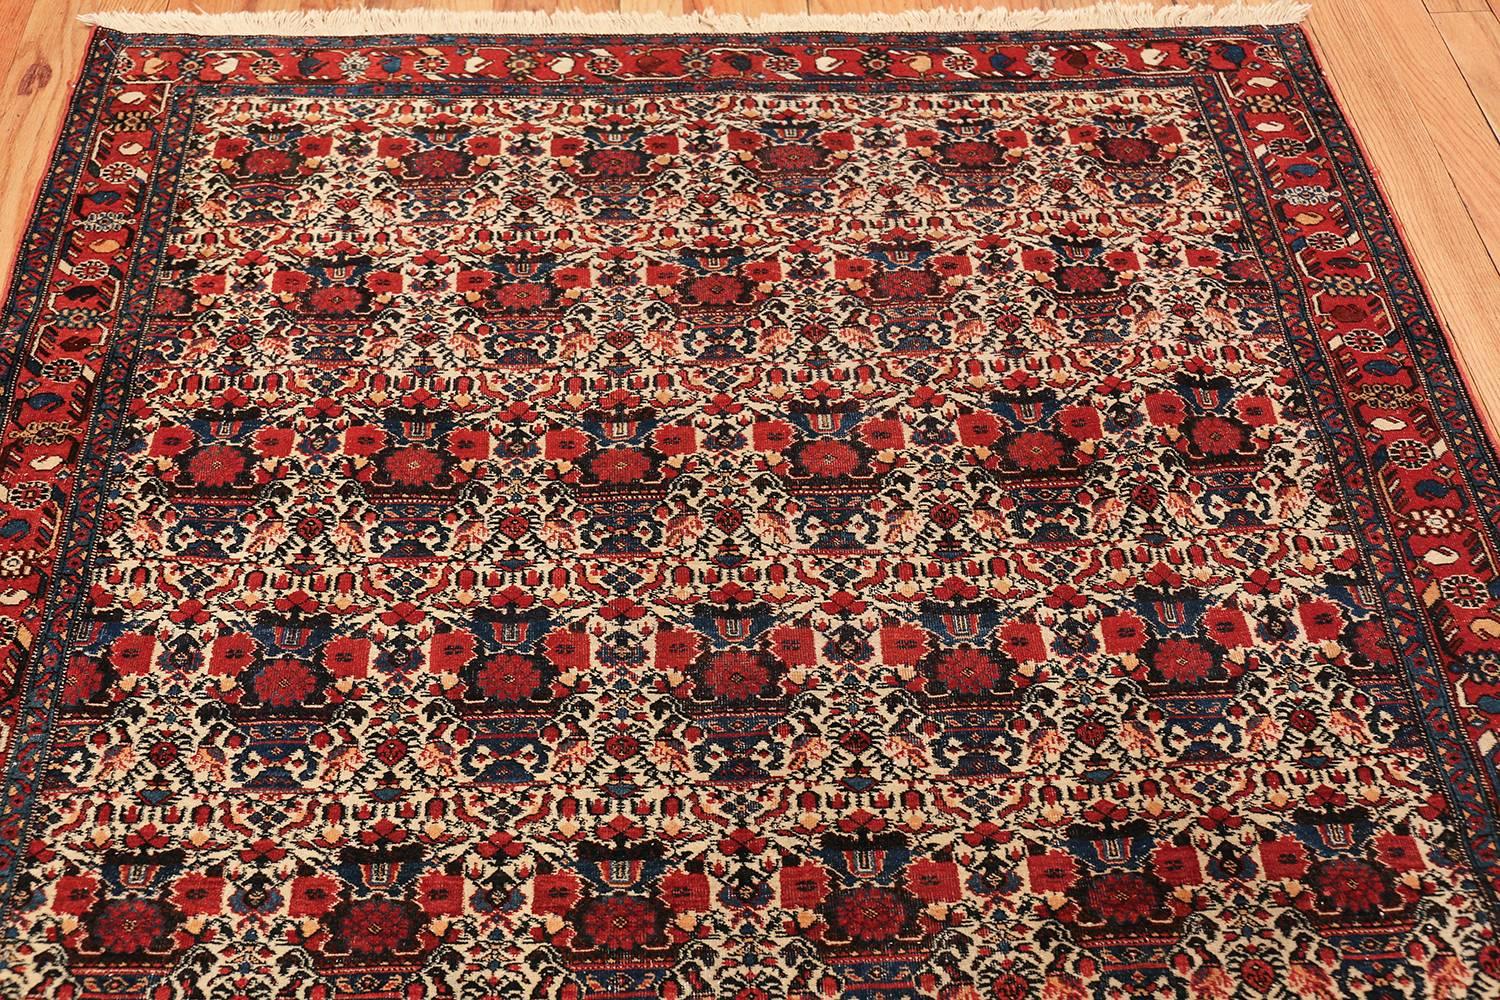 Vintage Small Size Sarouk Farahan Persian Rug. 5 ft 1 in x 7 ft 9 in  In Excellent Condition For Sale In New York, NY